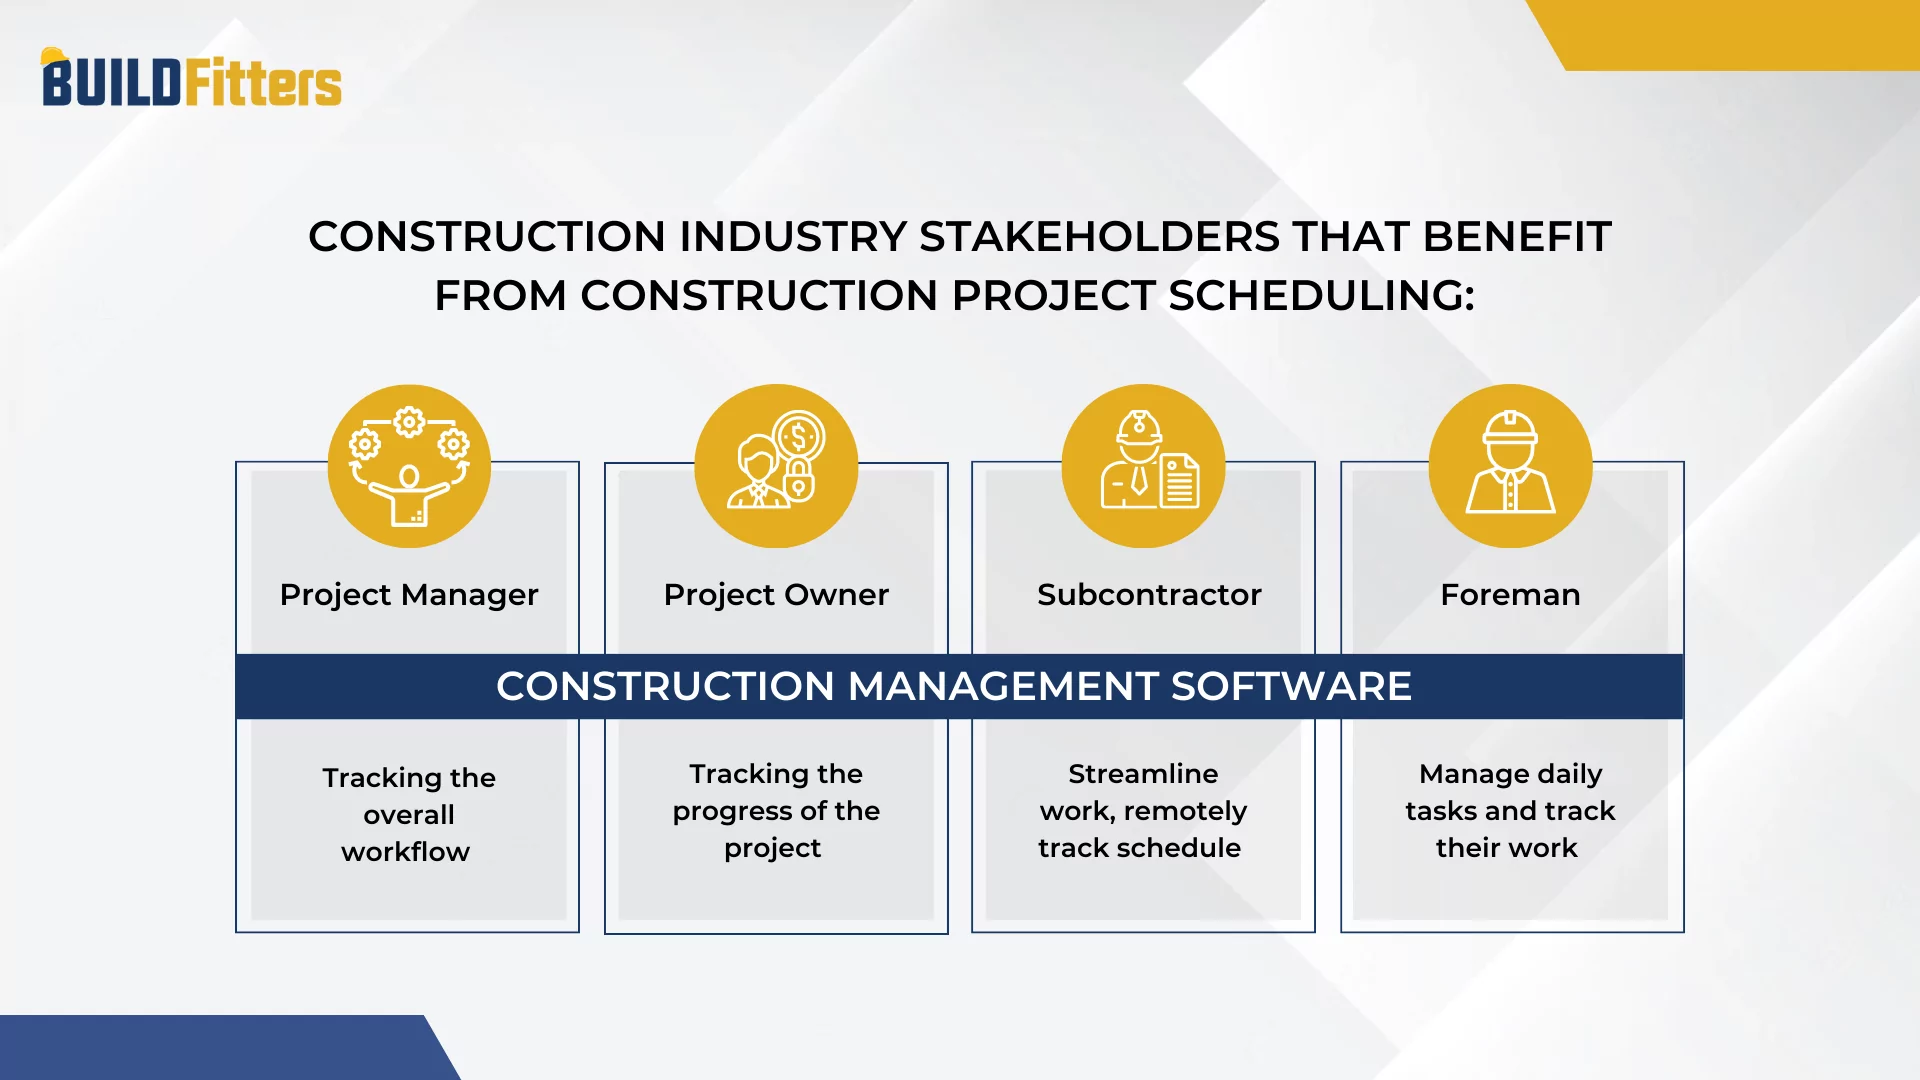 Infographics show that Construction Industry Stakeholders that benefit from construction project software